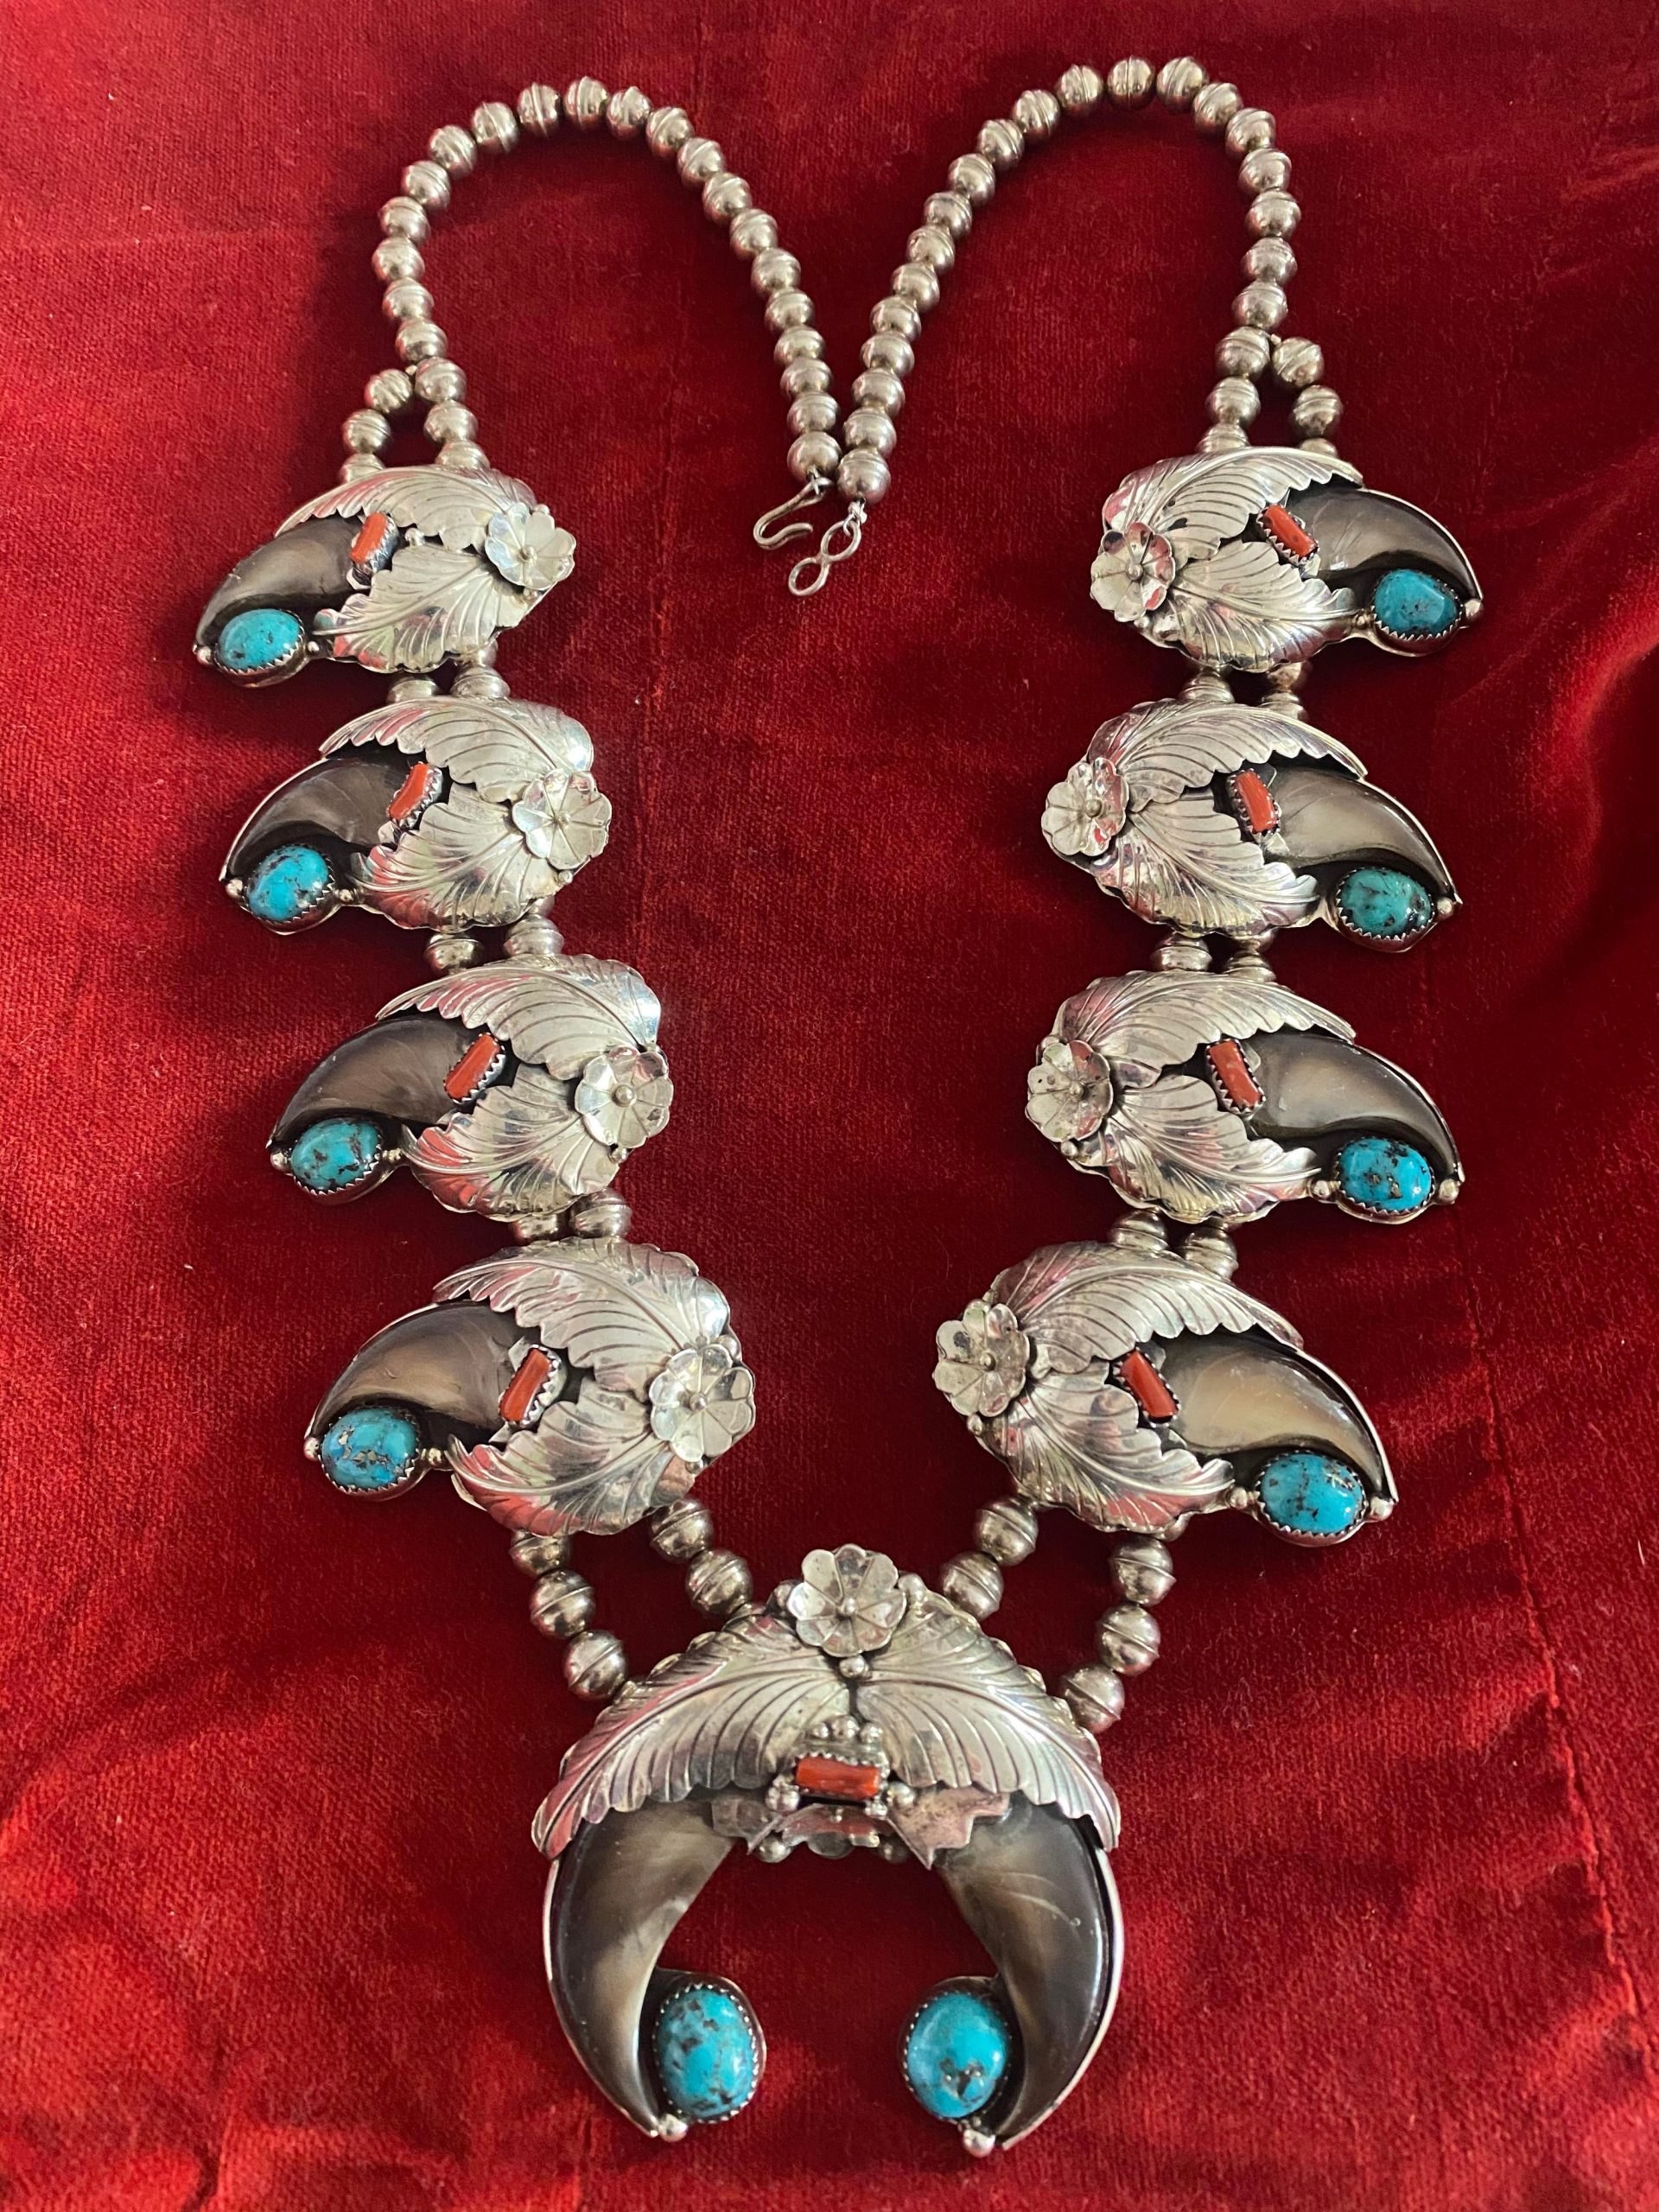 Sterling Silver and Turquoise Squash Blossom Necklace | Paul Bensel Jewelers